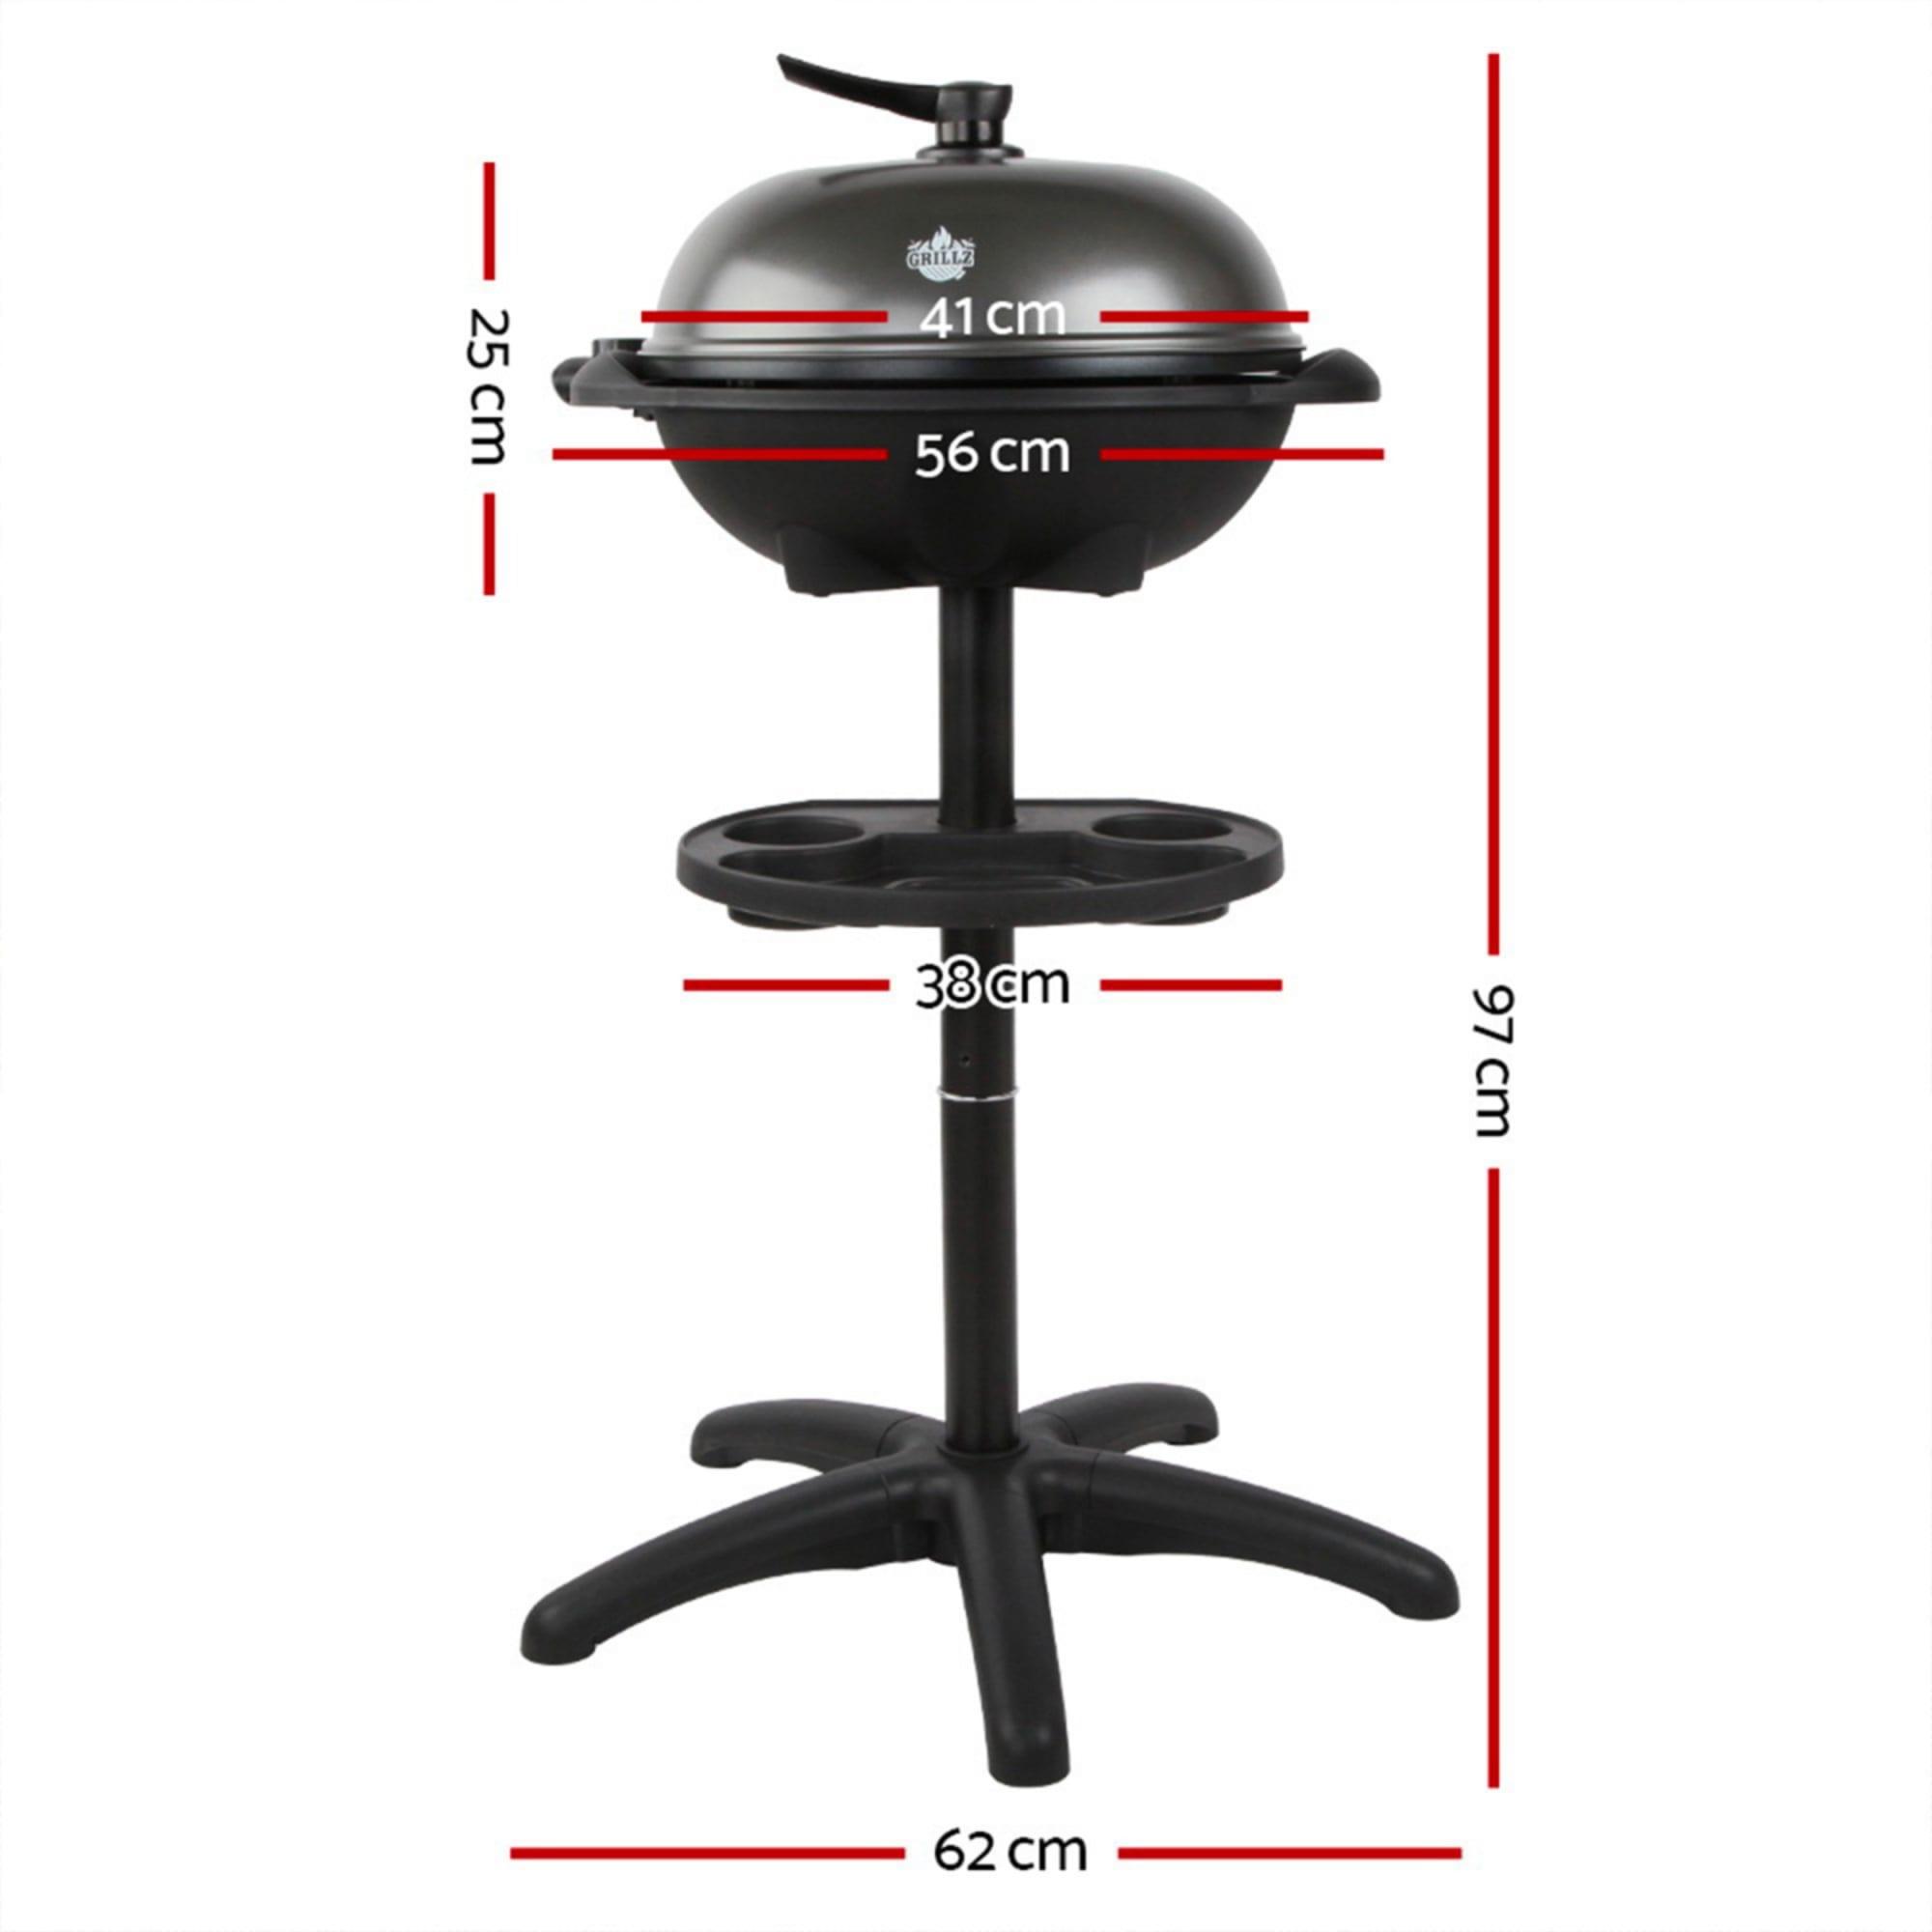 Grillz Portable Electric Barbecue Grill with Stand Image 3